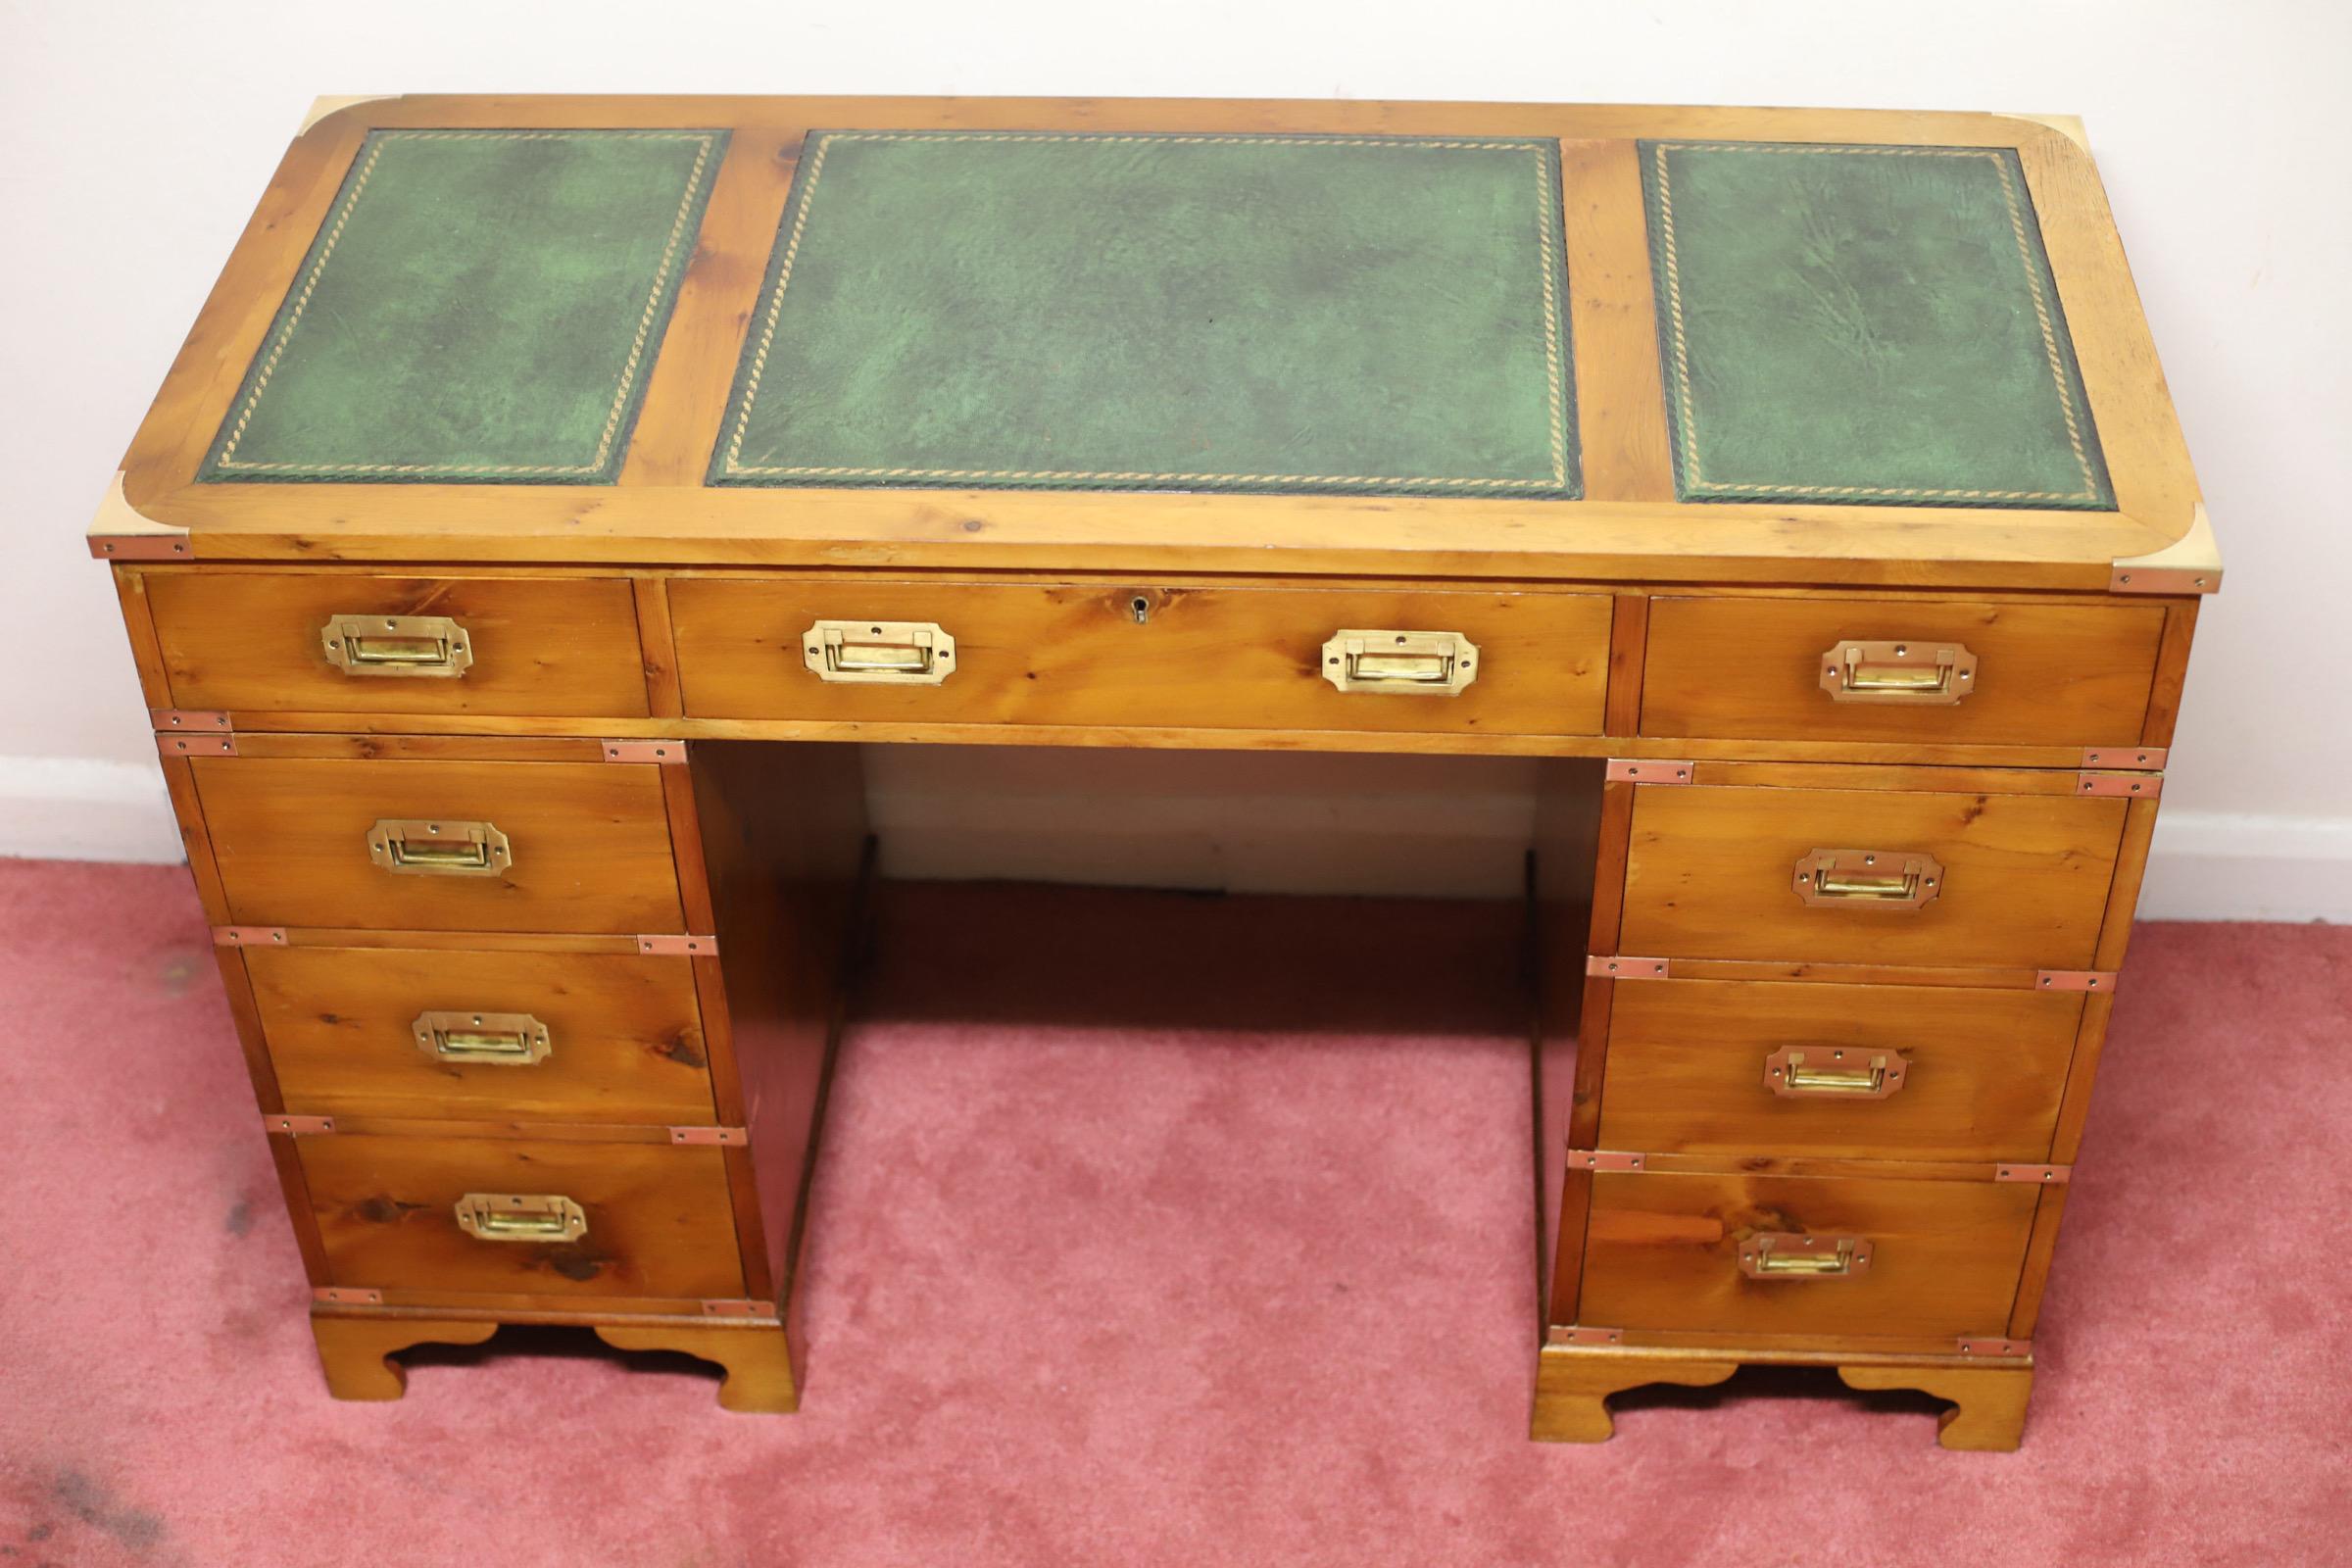 Hand-Crafted Lovely Yew Wood Military Campaign Twin Pedestal Desk 